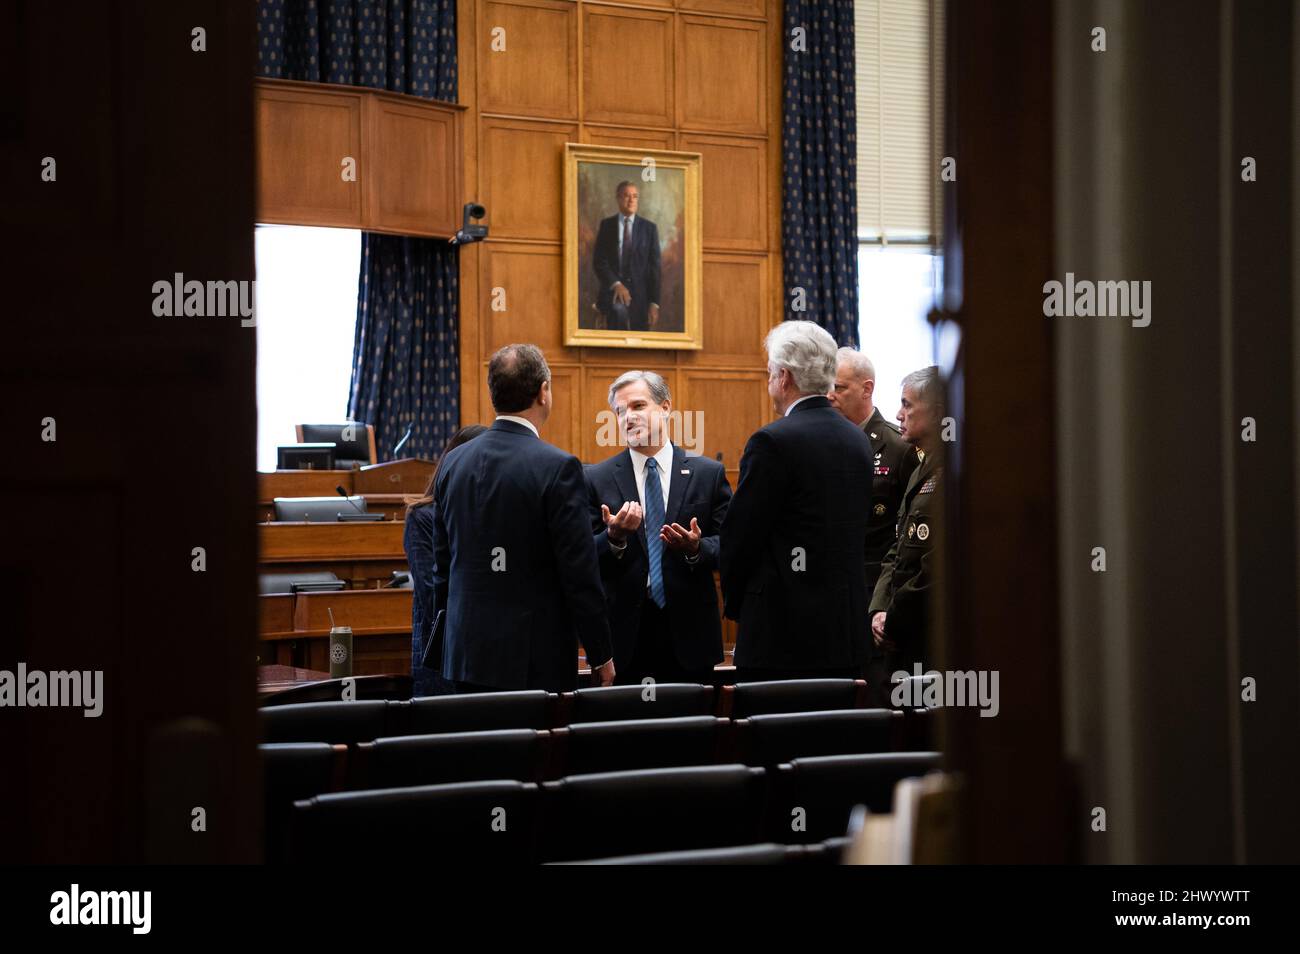 Federal Bureau of Investigation Director Christopher Wray, center, speaks with Director of National Intelligence Avril Haines, Representative Adam Schiff (D-CA), Central Intelligence Agency Director William Burns, Defense Intelligence Agency Director Lieutenant General Scott Berrier, and National Security Agency Director General Paul Nakasone before a House Permanent Select Committee on Intelligence hearing on Worldwide Threats, at the U.S. Capitol in Washington, DC, on Tuesday, March 8, 2022. This week Congress will urgently push to pass a government funding bill, with billions of dollars i Stock Photo